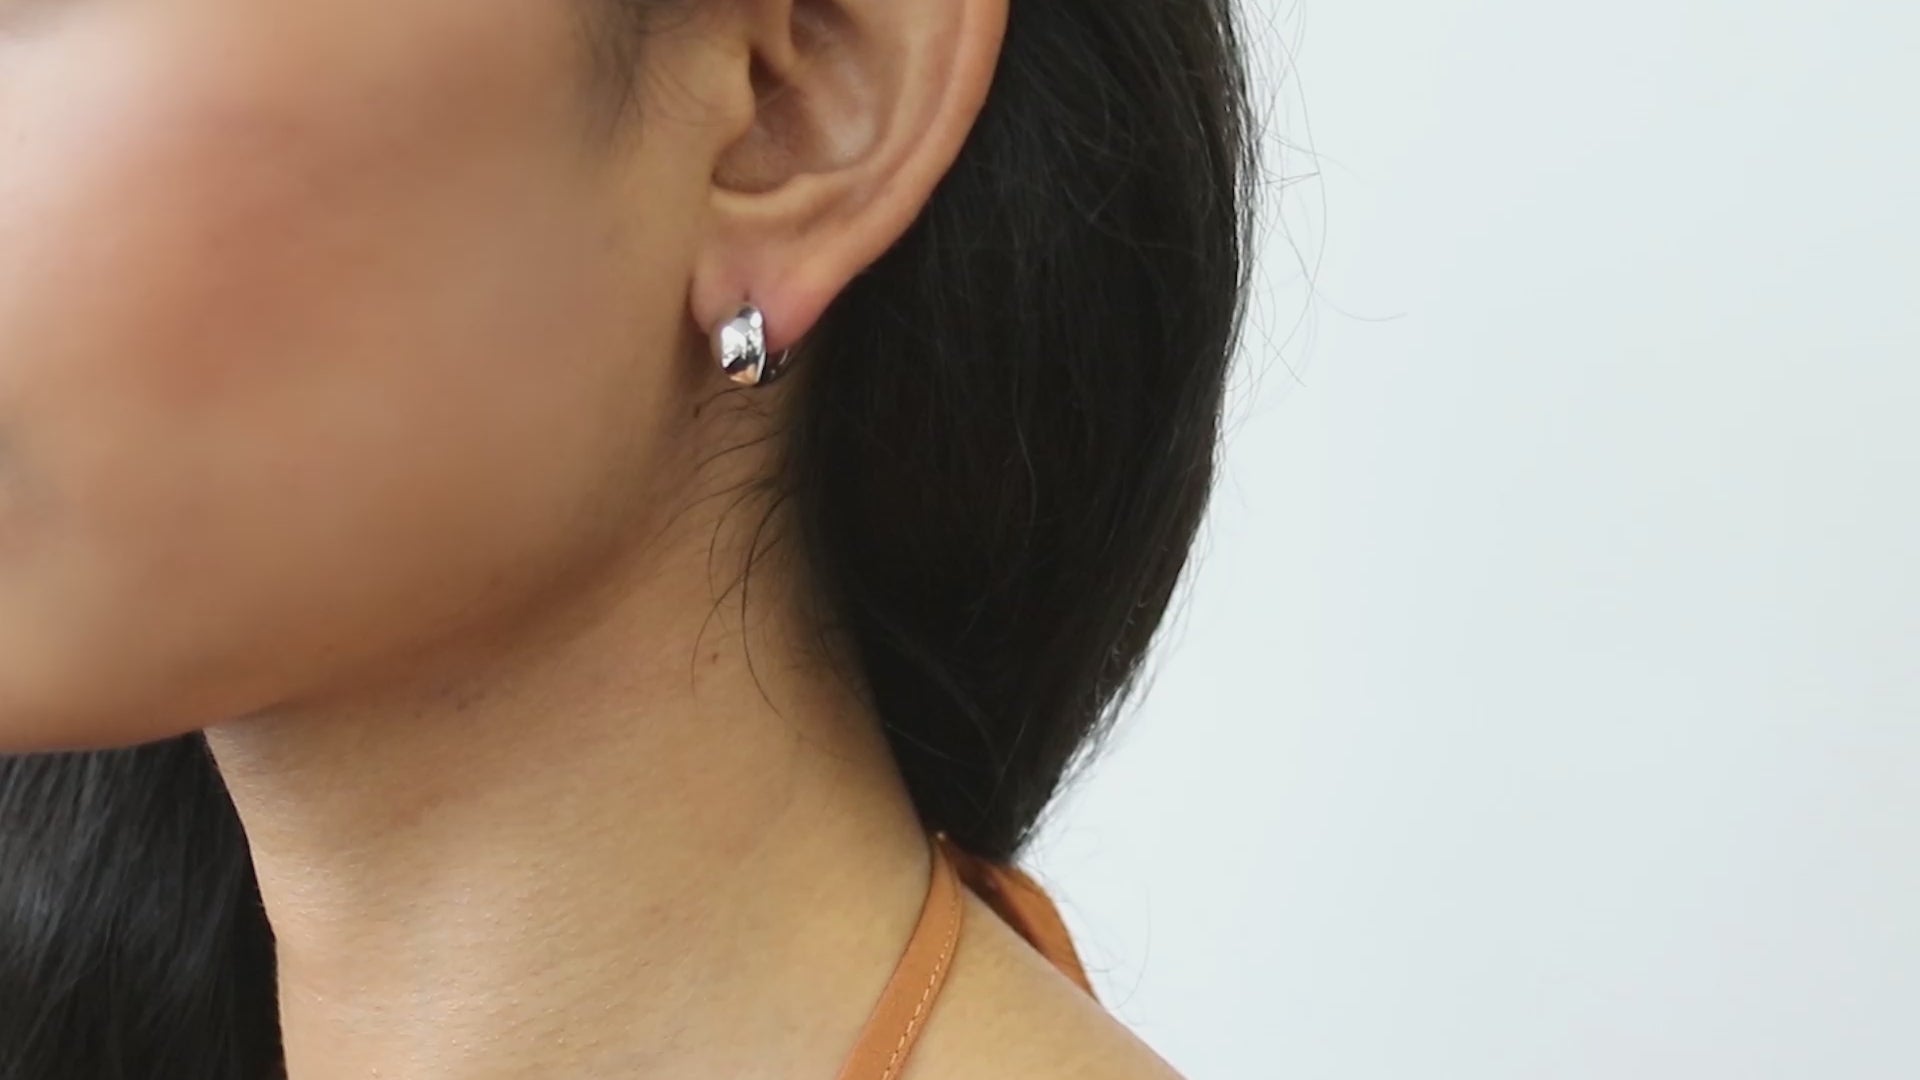 Video Contains Dome Mini Huggie Earrings in Sterling Silver 0.45". Style Number E1074